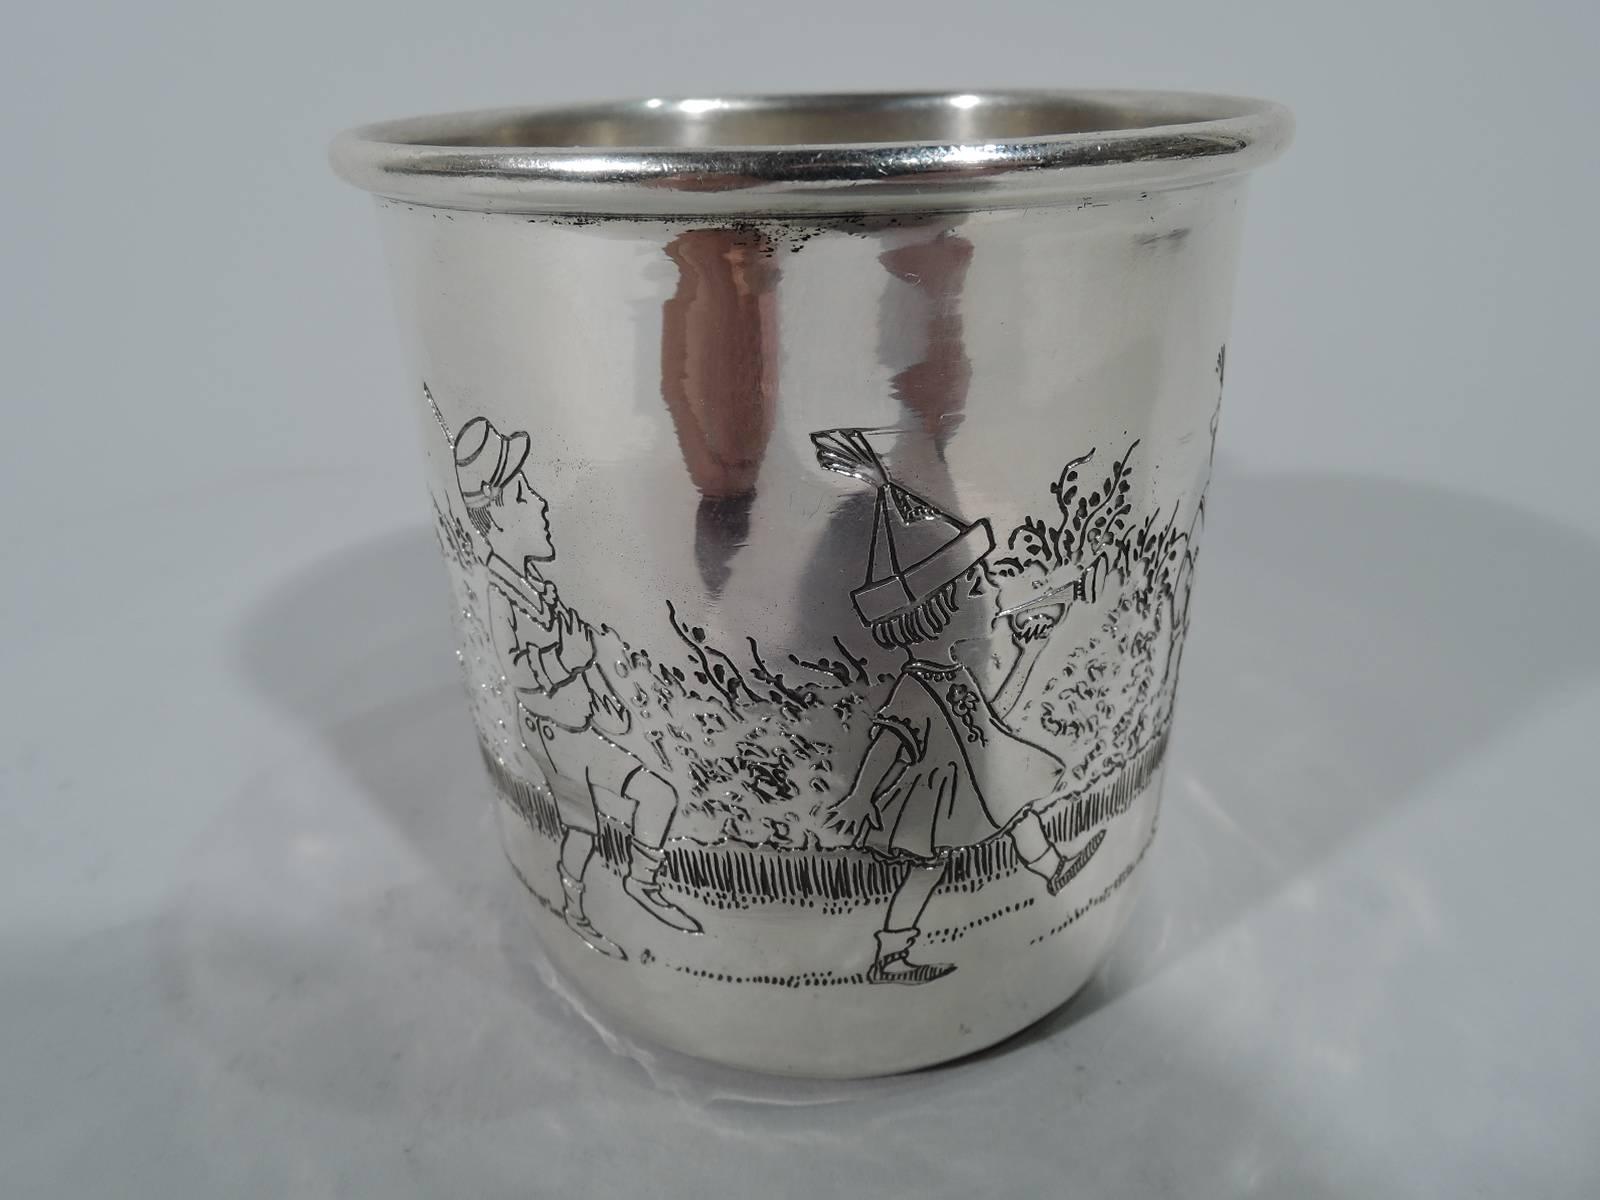 Edwardian sterling silver baby cup. Made by HR Morss in Attleboro, Mass. Straight sides, molded rim, and c-scroll handle. Etched procession of boys and girls drumming, trumpeting, sword waving, and flag flying. A sweet piece with patriotic and